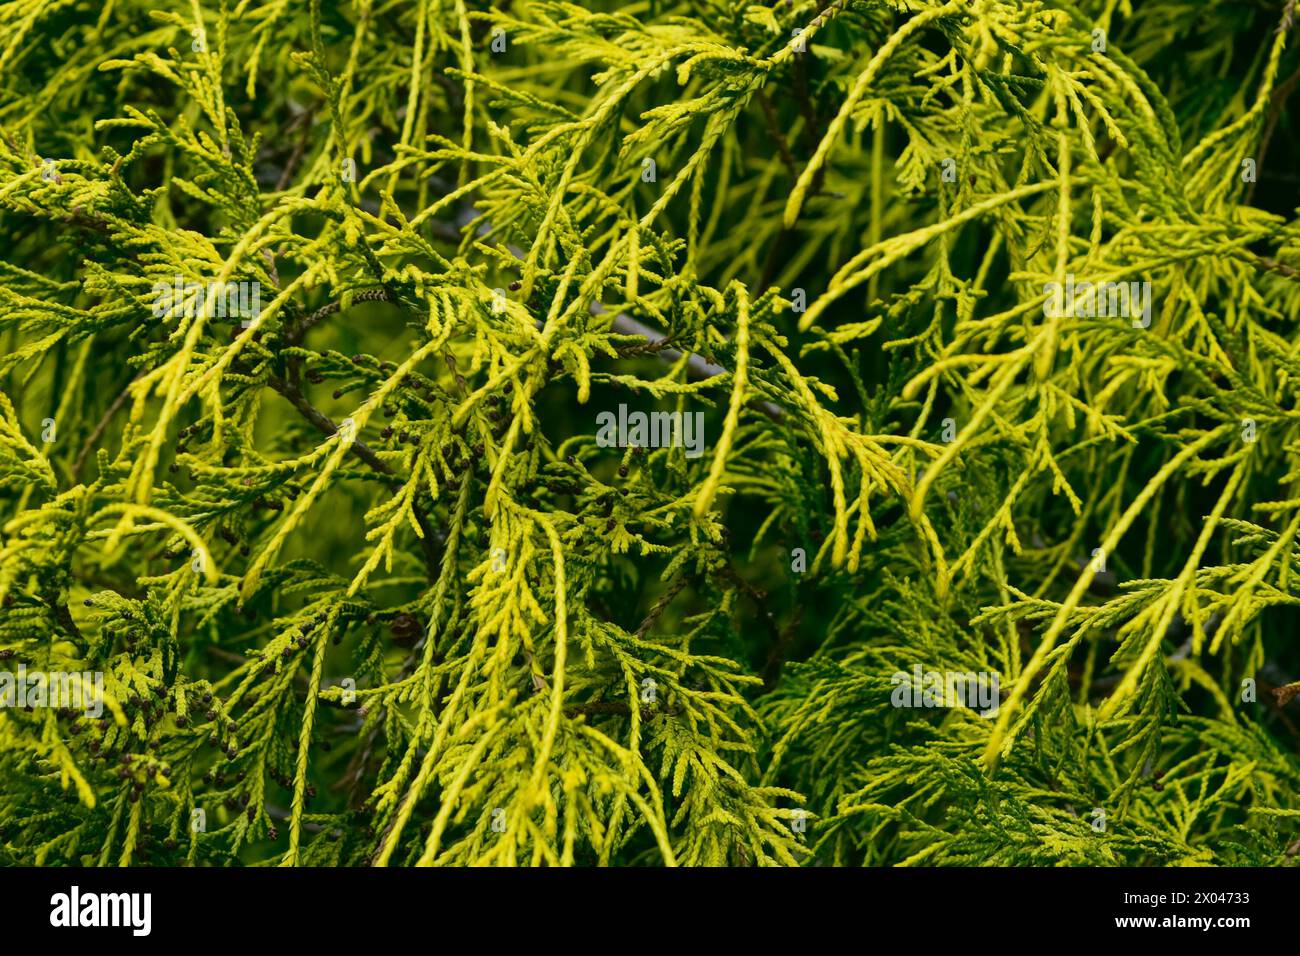 Green branches of Chamaecyparis, close-up. cypress, false cypress. Green plant background. Stock Photo